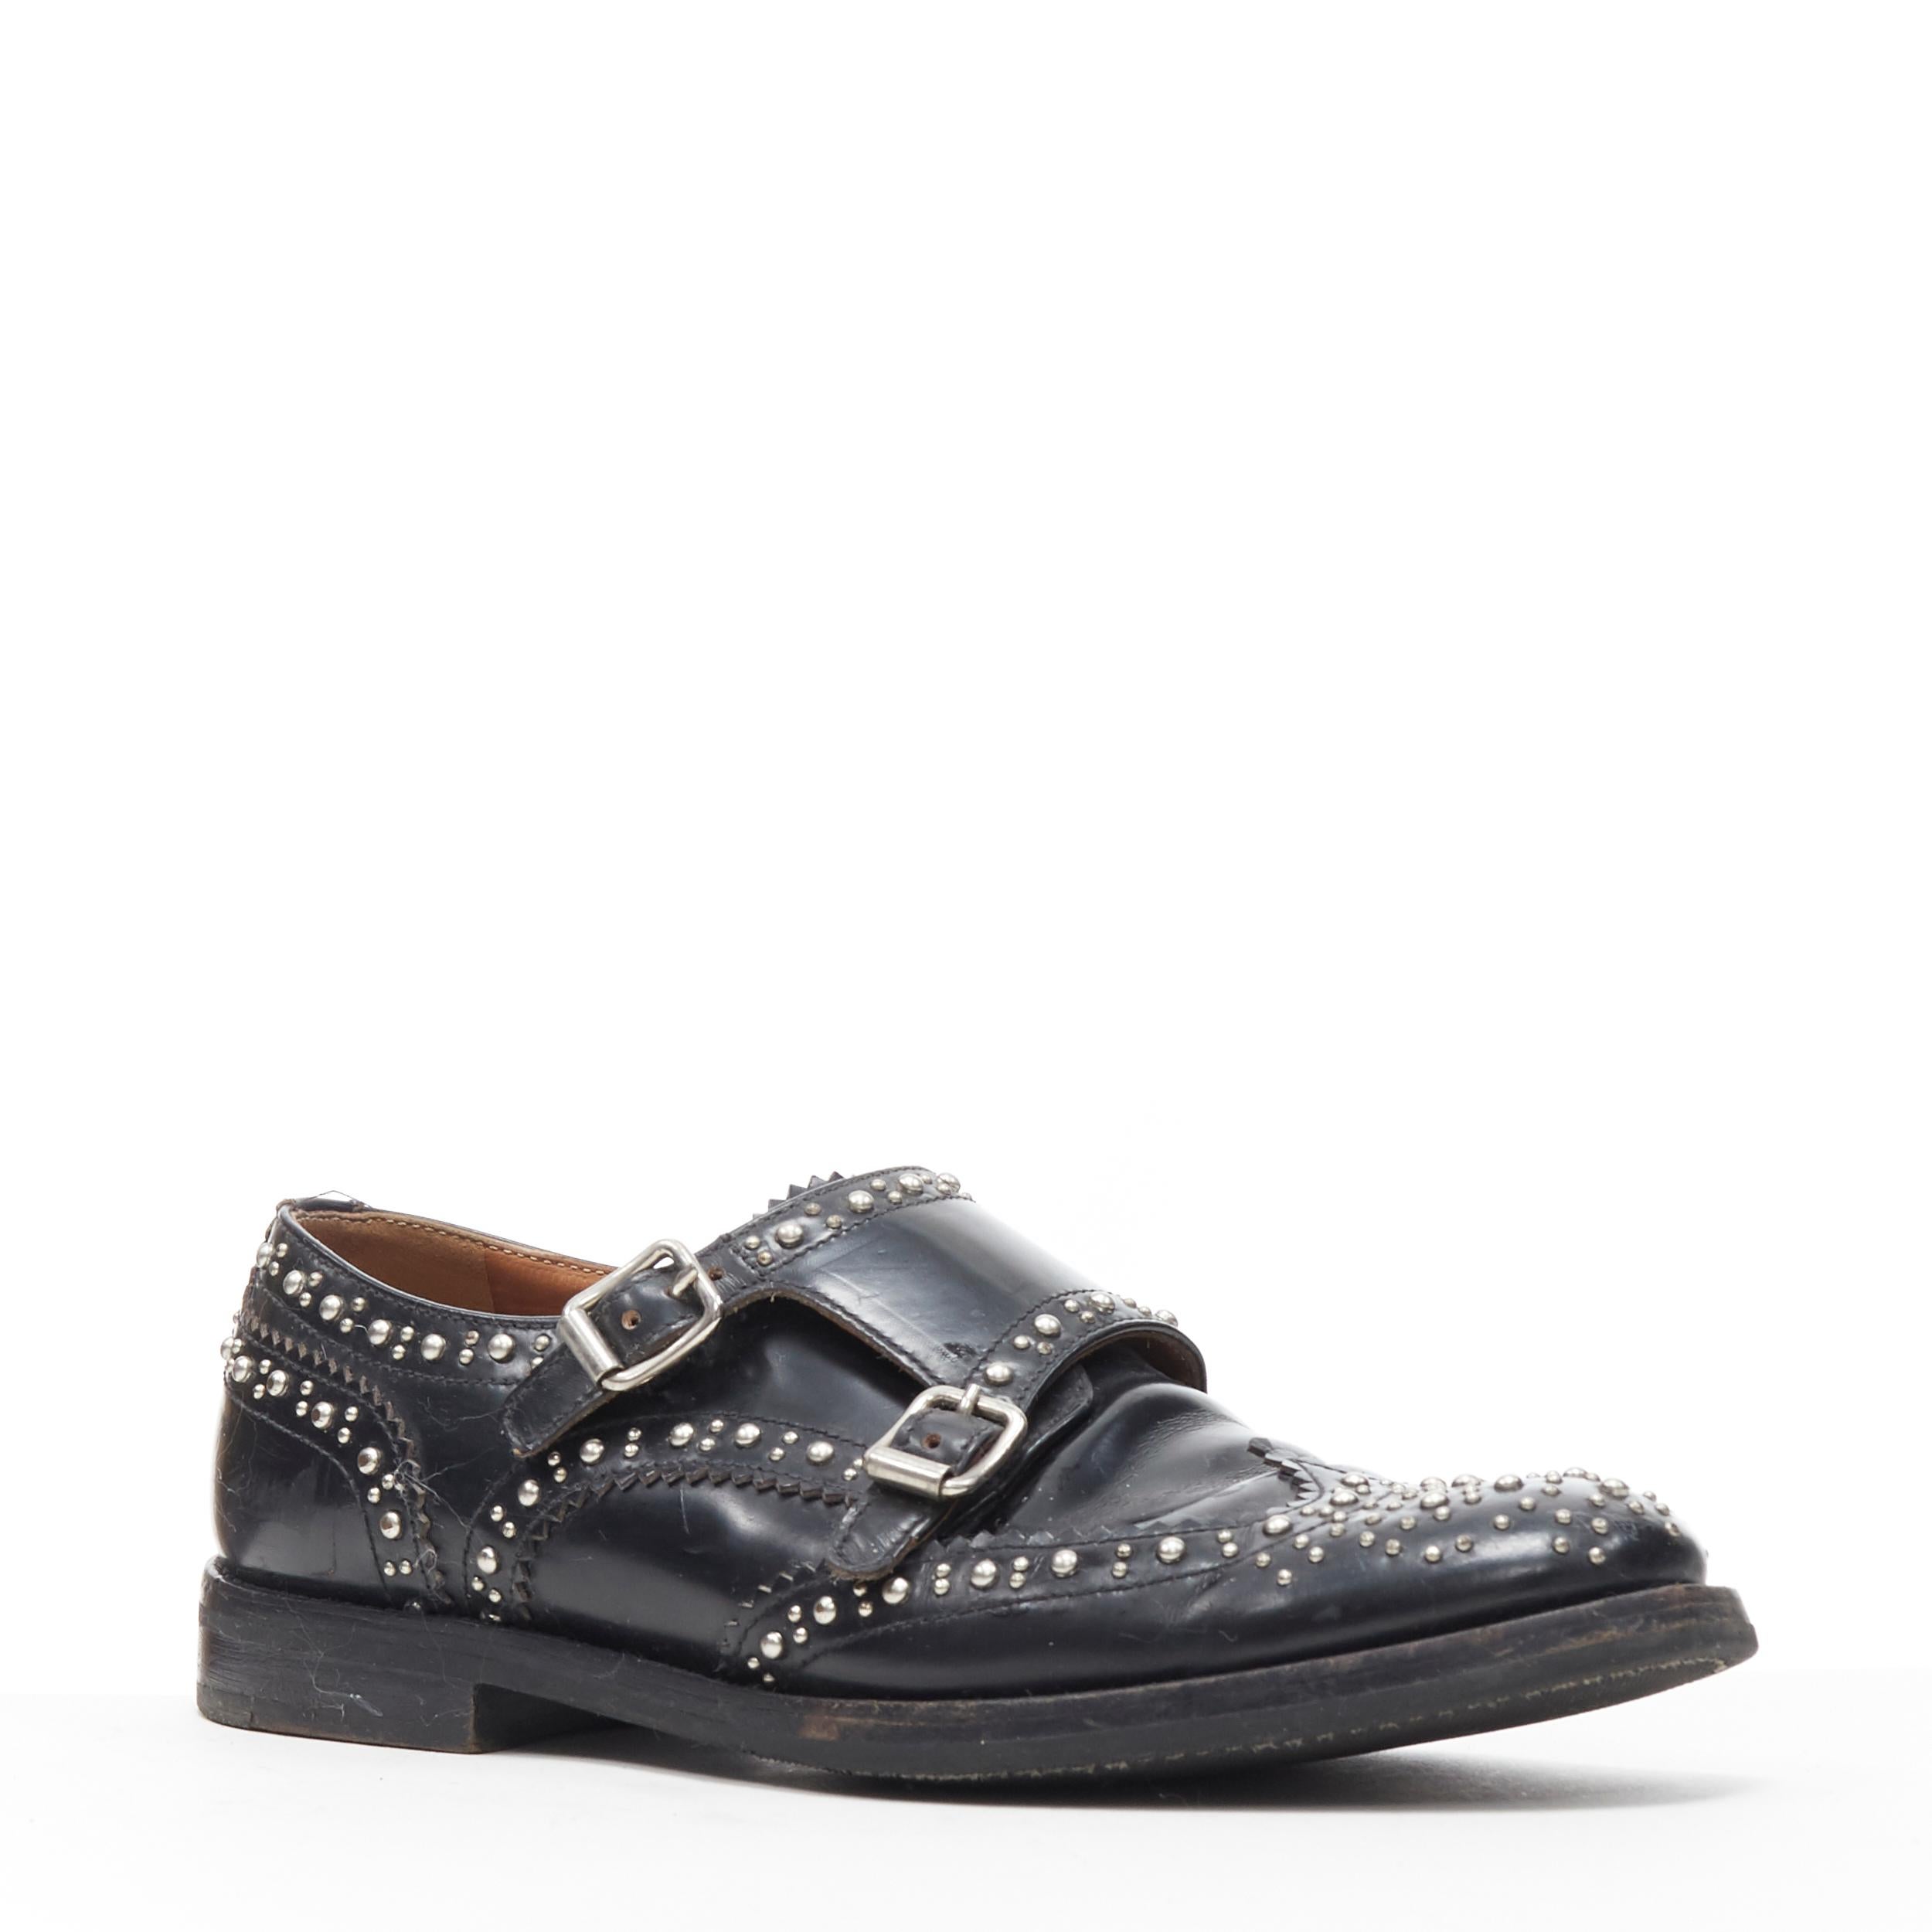 CHURCHS Lana Met black silver stud dual buckle monk brogue loafer shoe EU36 
Reference: EACN/A00107 
Brand: Churchs 
Material: Leather 
Color: Black 
Pattern: Solid 
Closure: Buckle 
Extra Detail: Lana met. Black leather with silver tone stud.